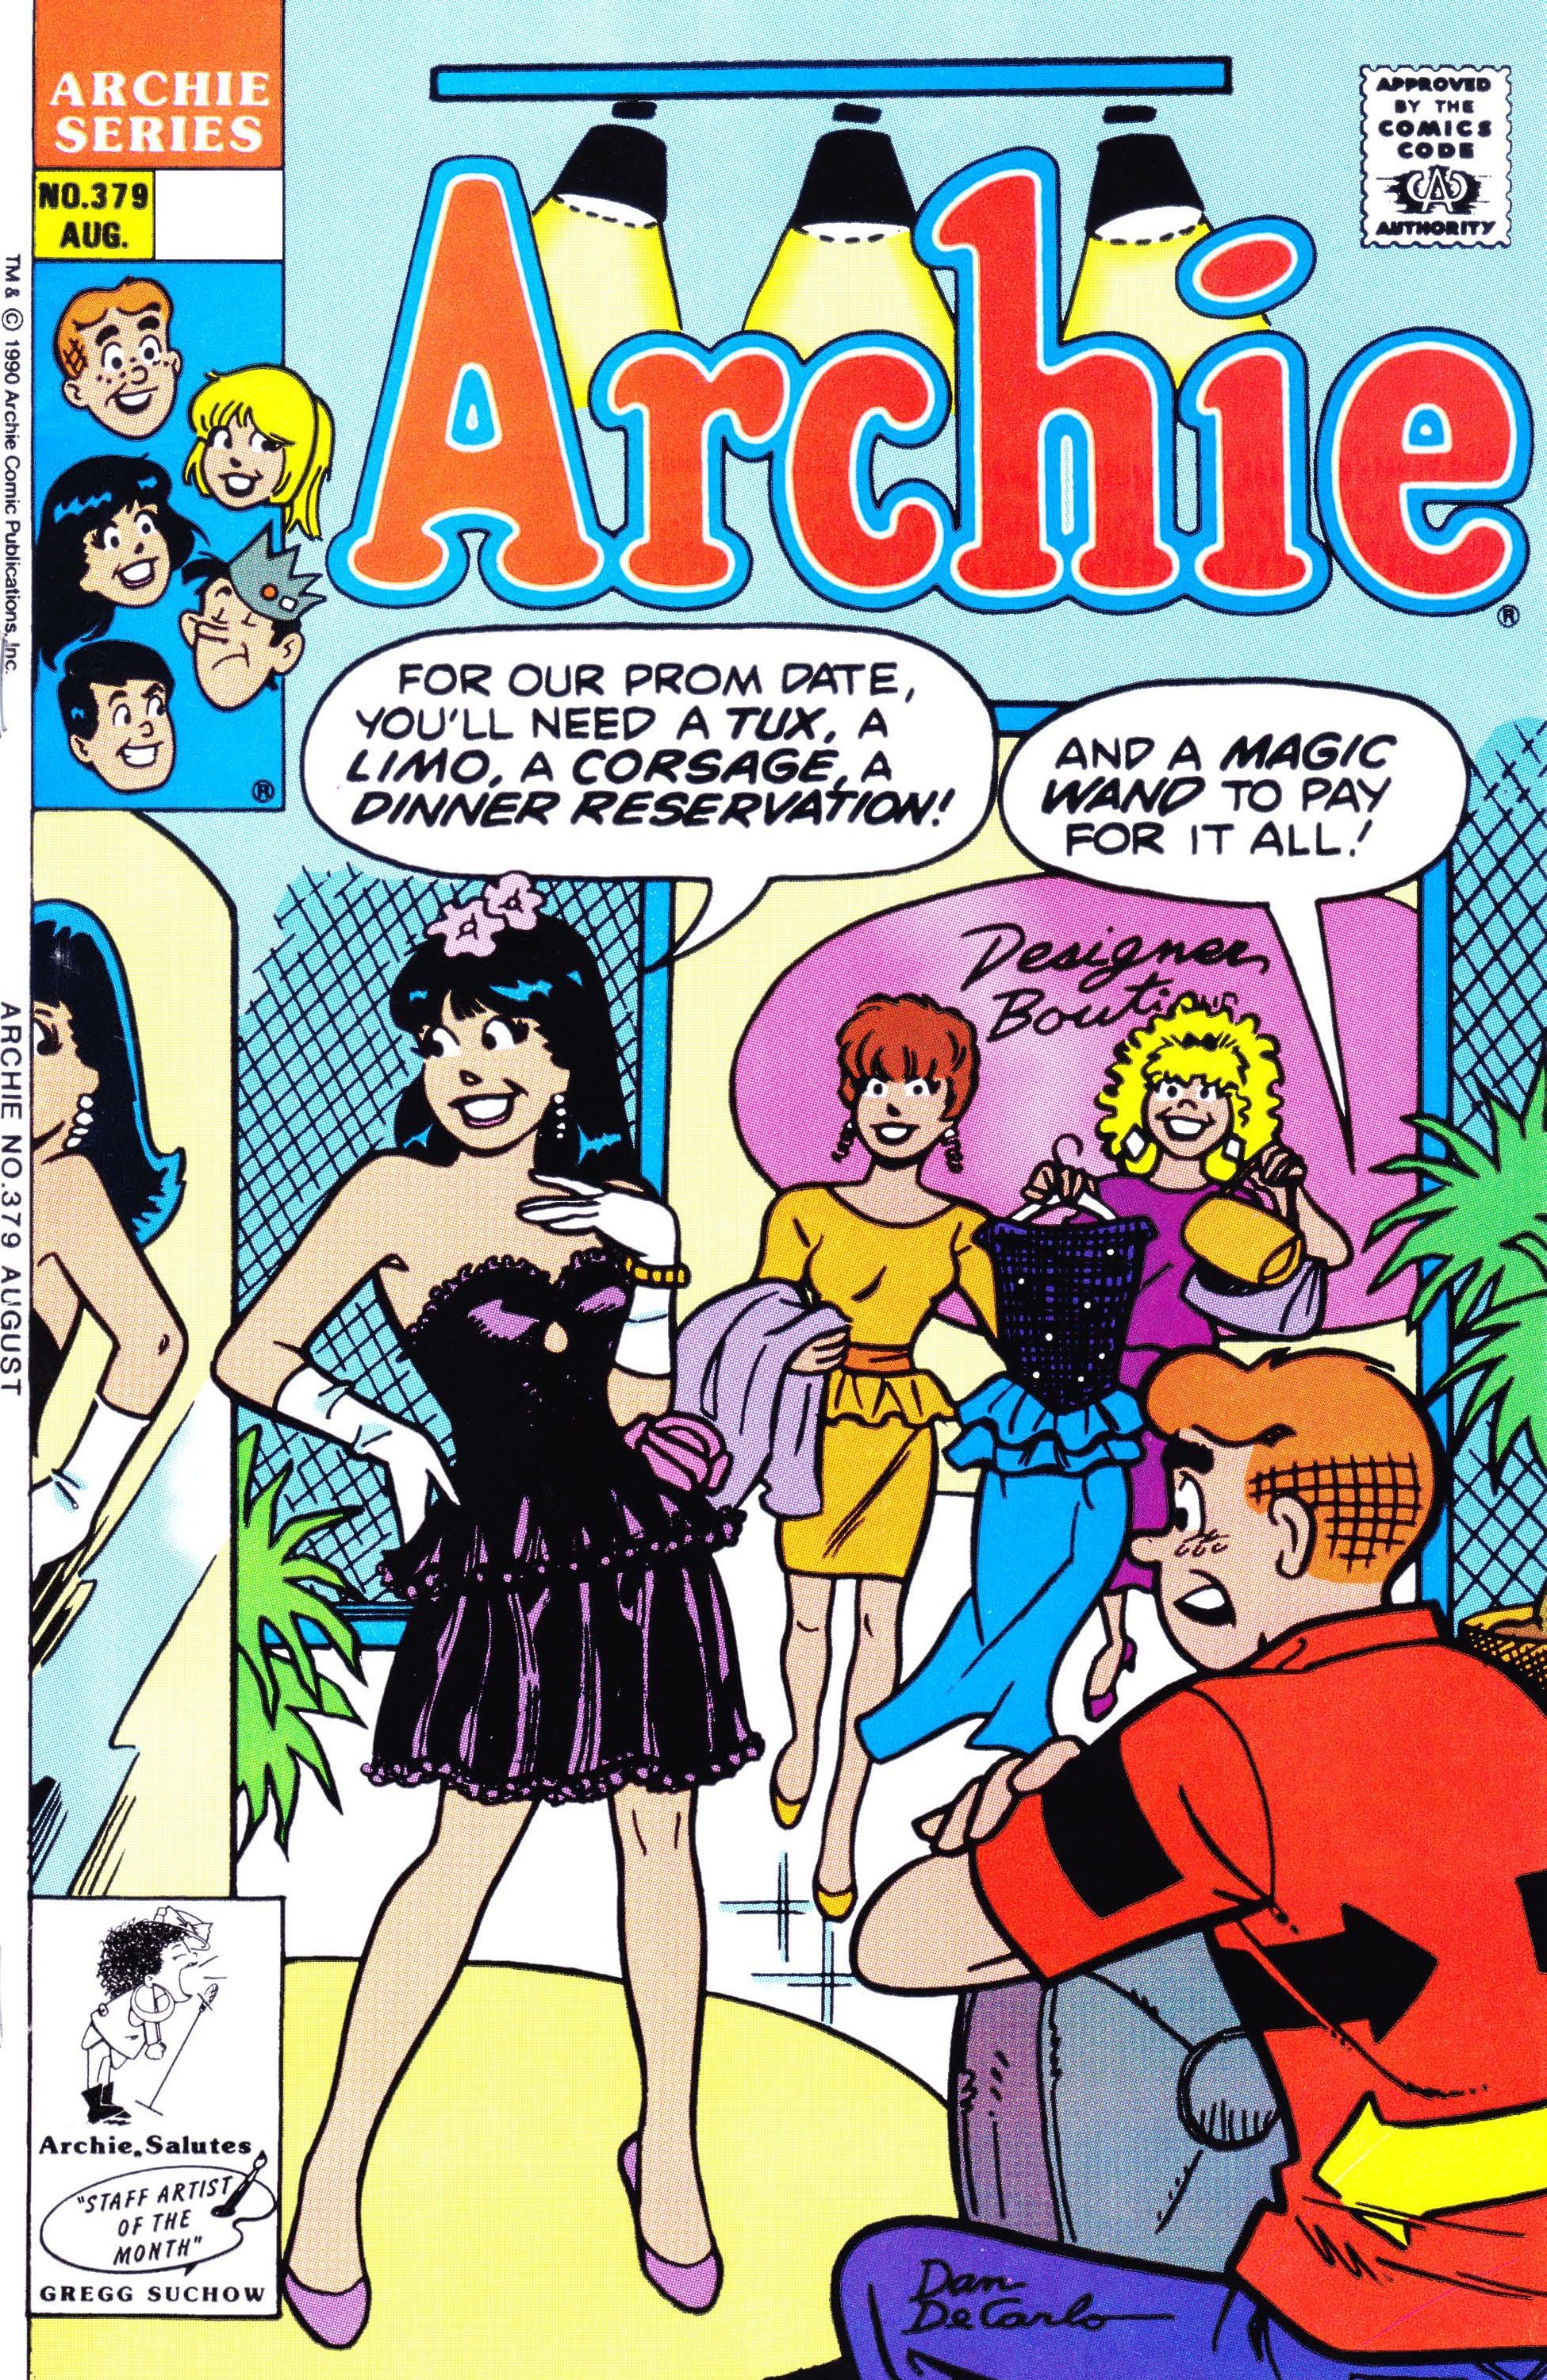 Read online Archie (1960) comic -  Issue #379 - 1